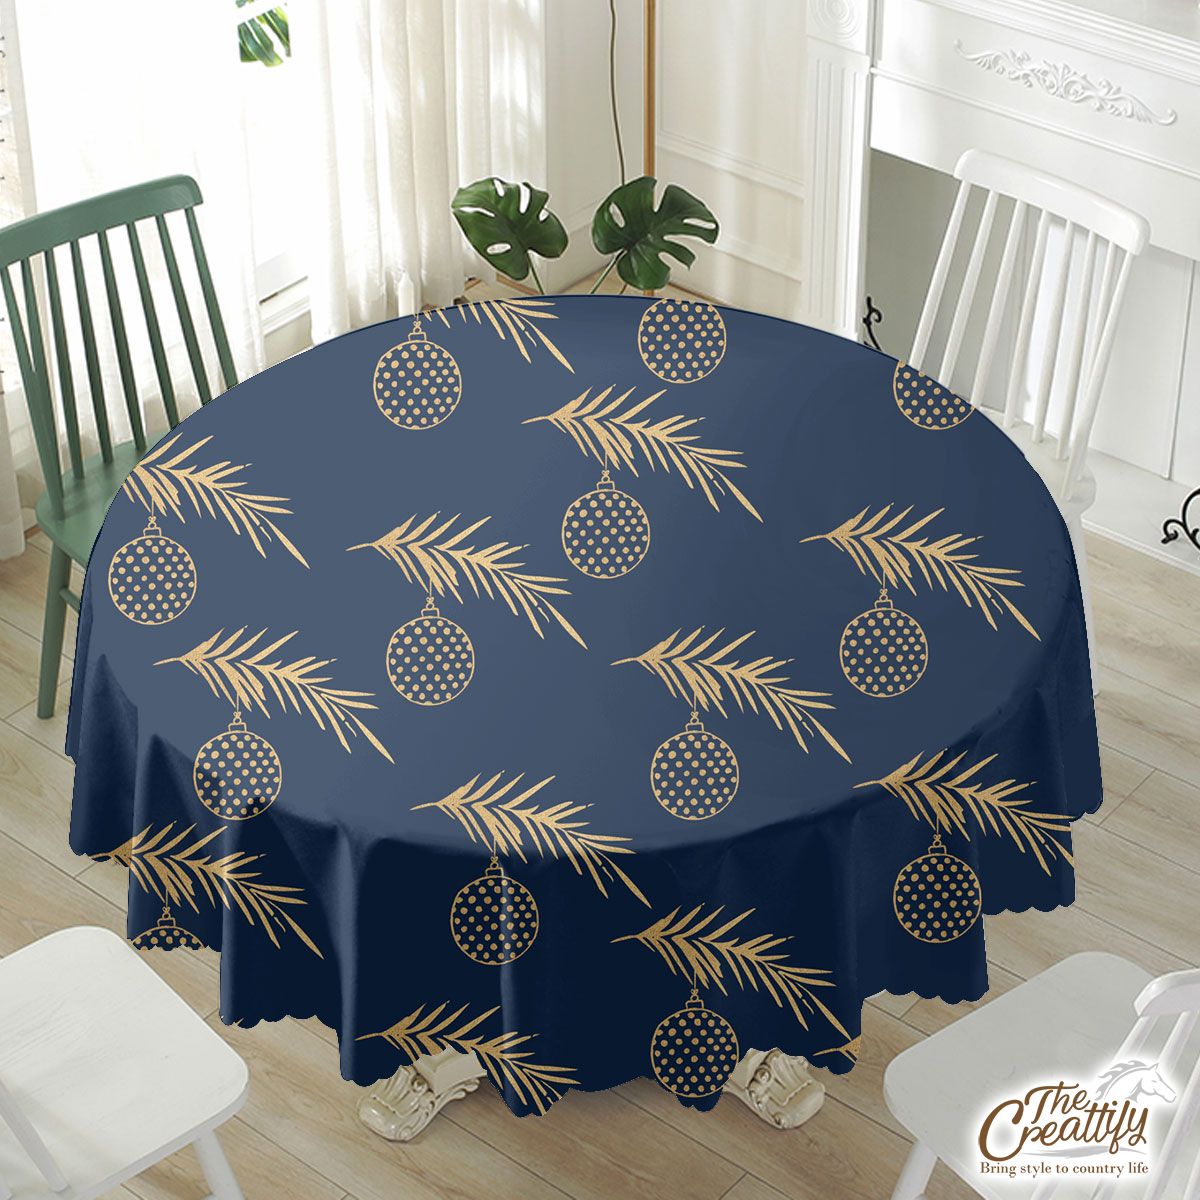 Christmas Balls With Long Leaf Pine Pattern Waterproof Tablecloth